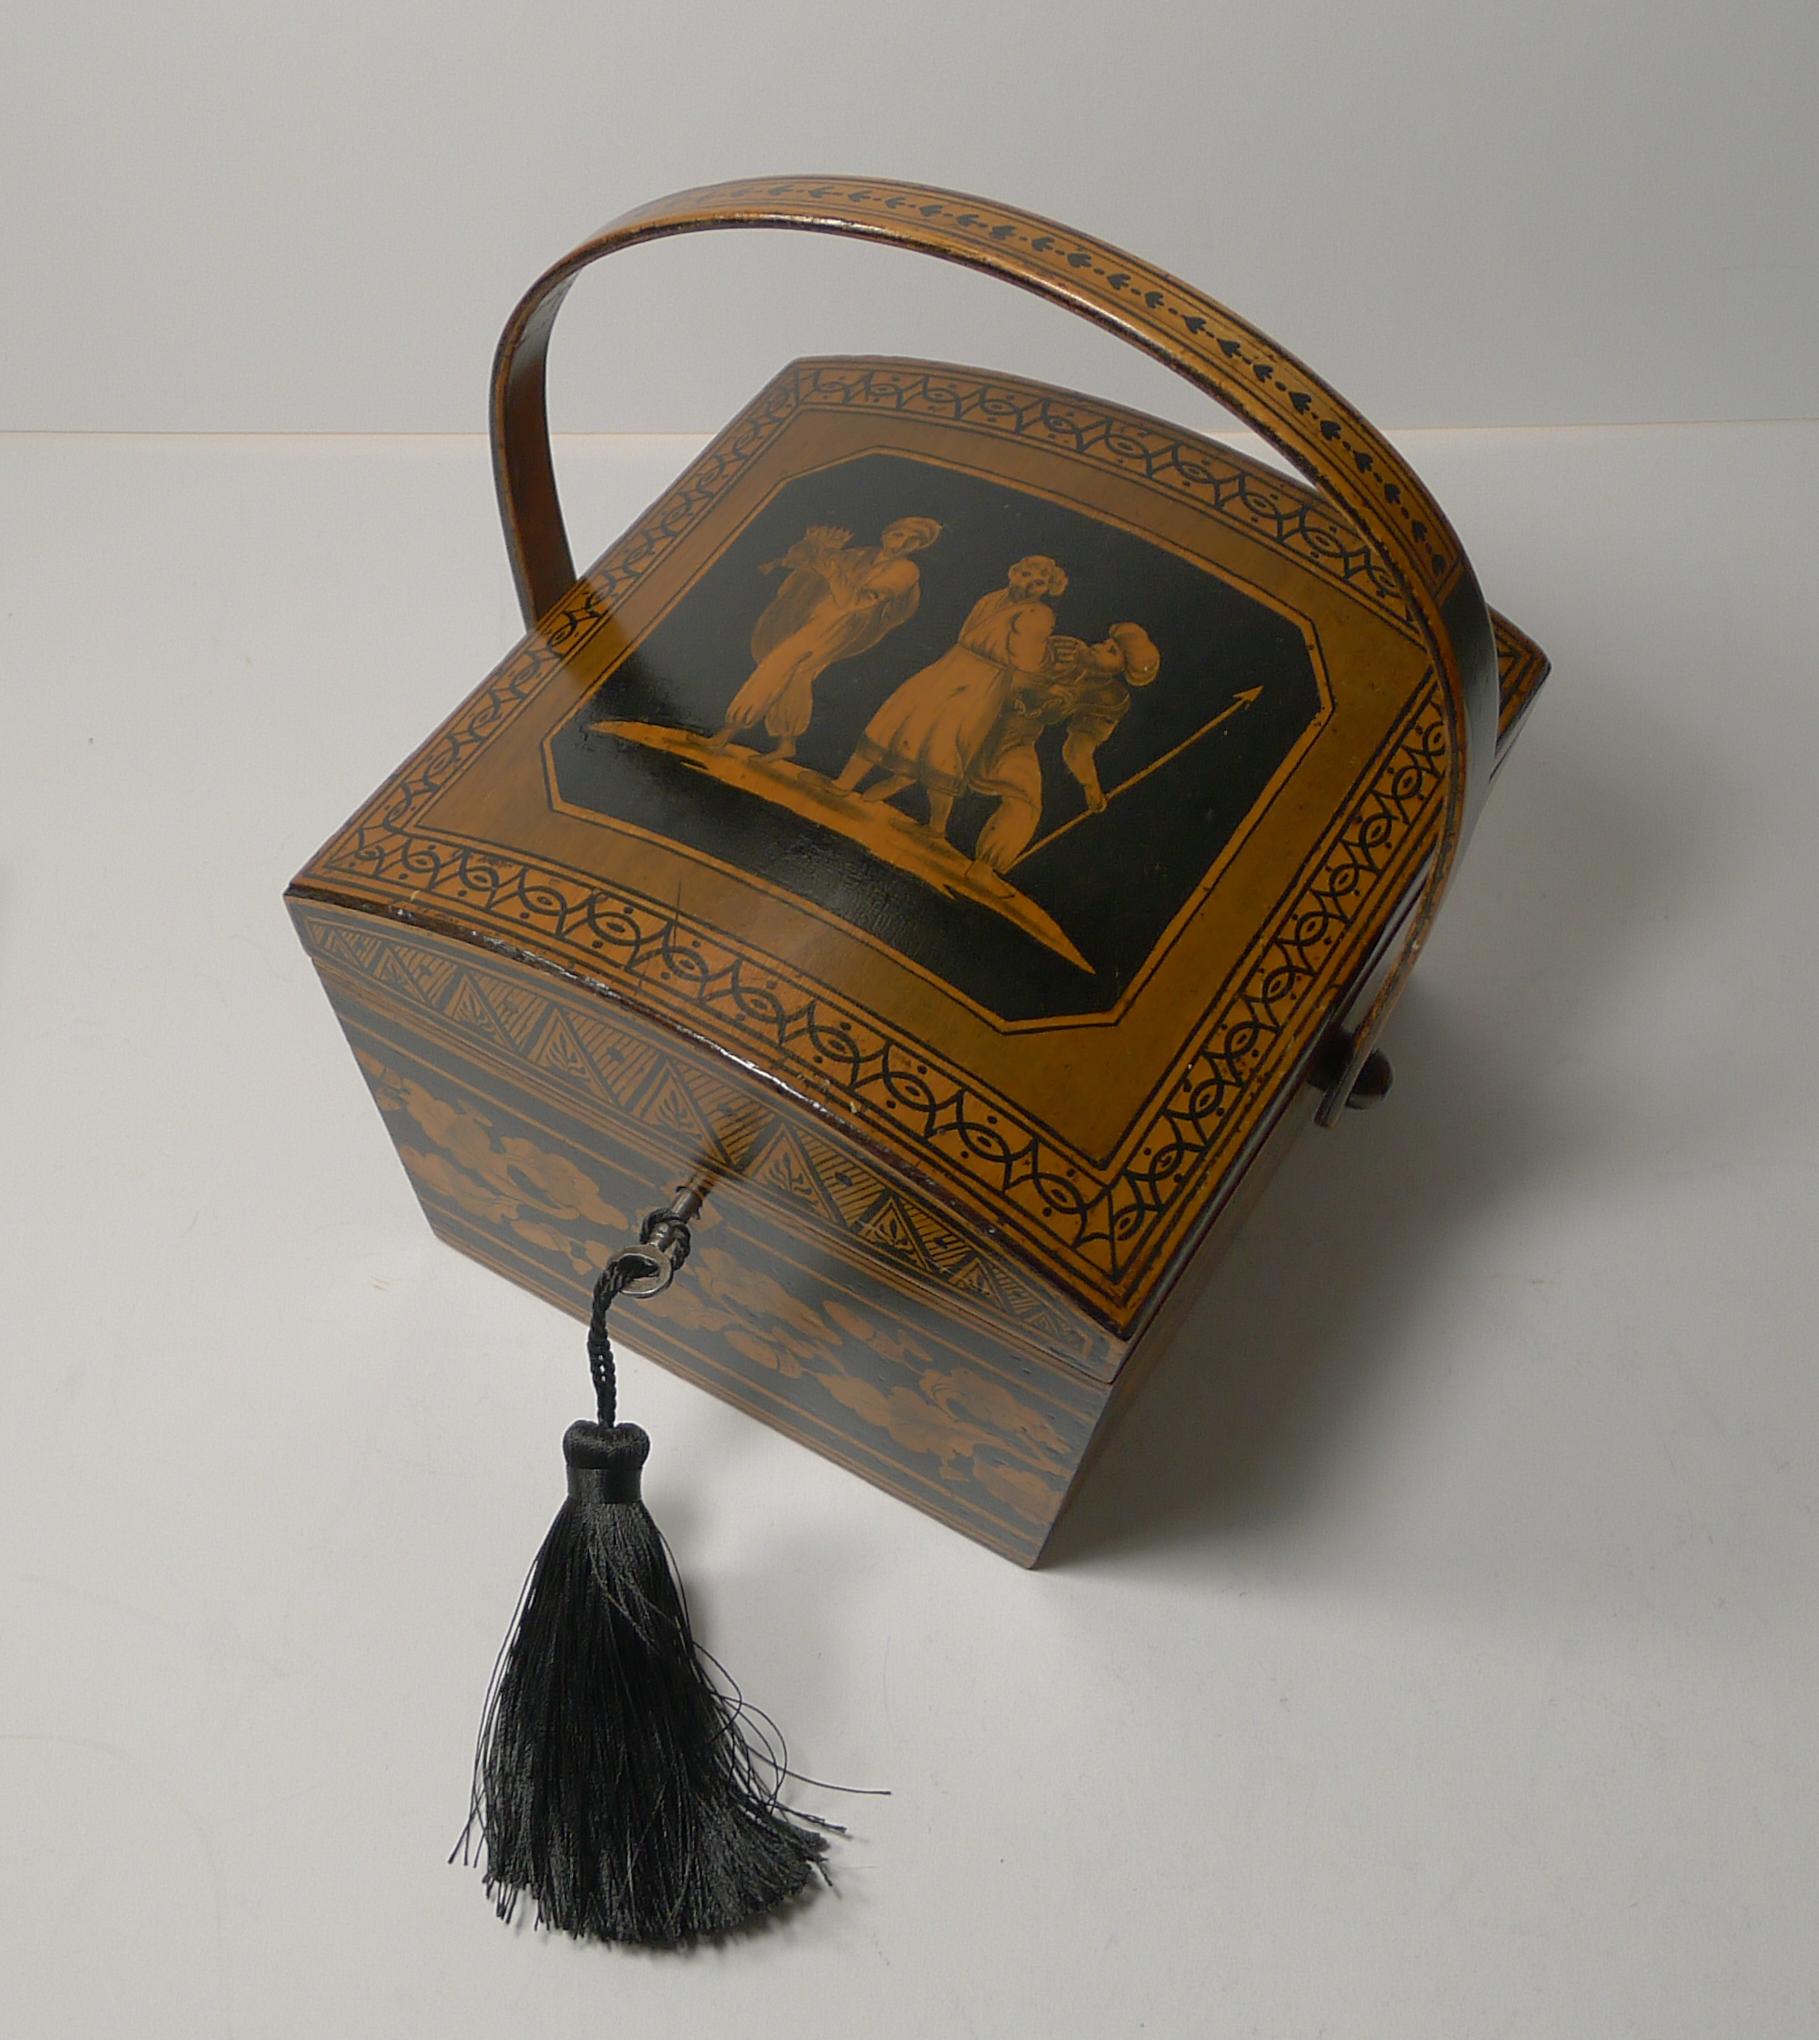 An absolutely charming Regency sewing box in the form of a basket with it's original bentwood folding swing handle.

The domed top features a figural scene with one of the men holding a Crown. The sides are decorated with a very English Oak Leaf